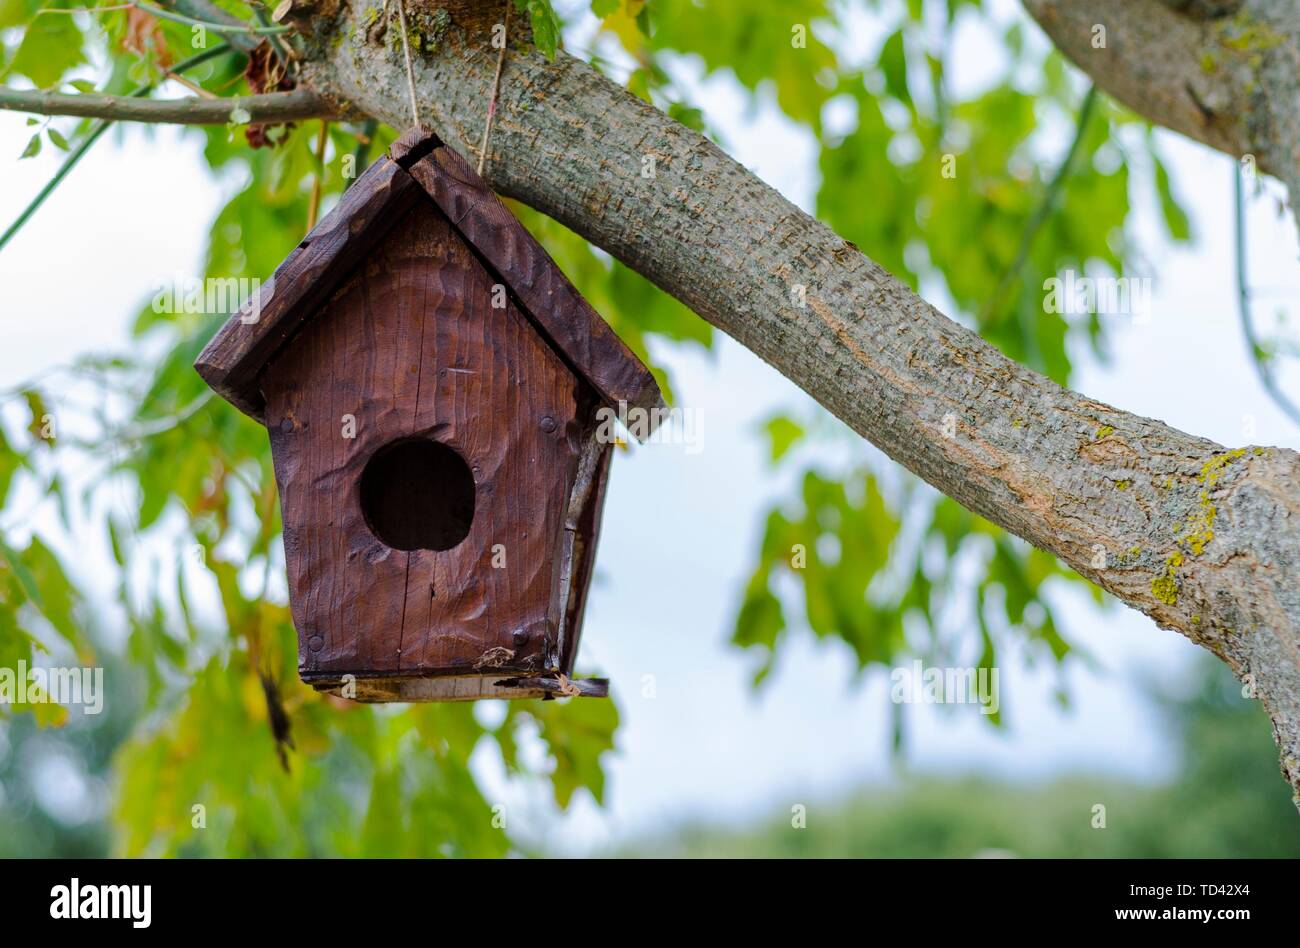 Pretty little wooden house for birds Stock Photo